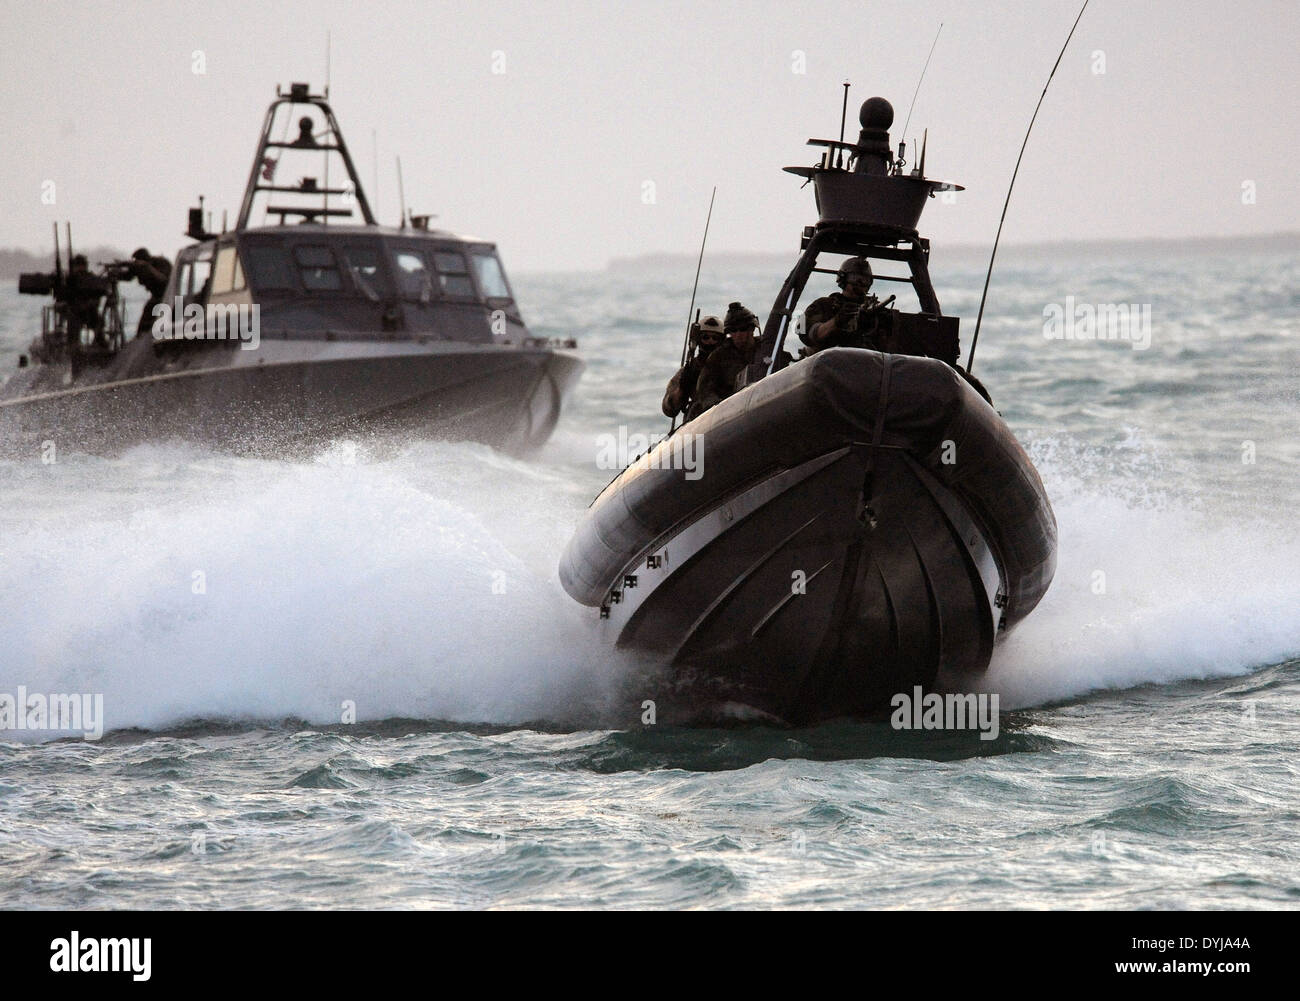 US Navy SEAL Special Warfare Combatant craft Crewmen assigned to Special Boat Team 20 navigates a rigid-hull inflatable boat film a scene in a movie production ¨I Am That Man” July 9, 2008 in Key West, Florida. Stock Photo